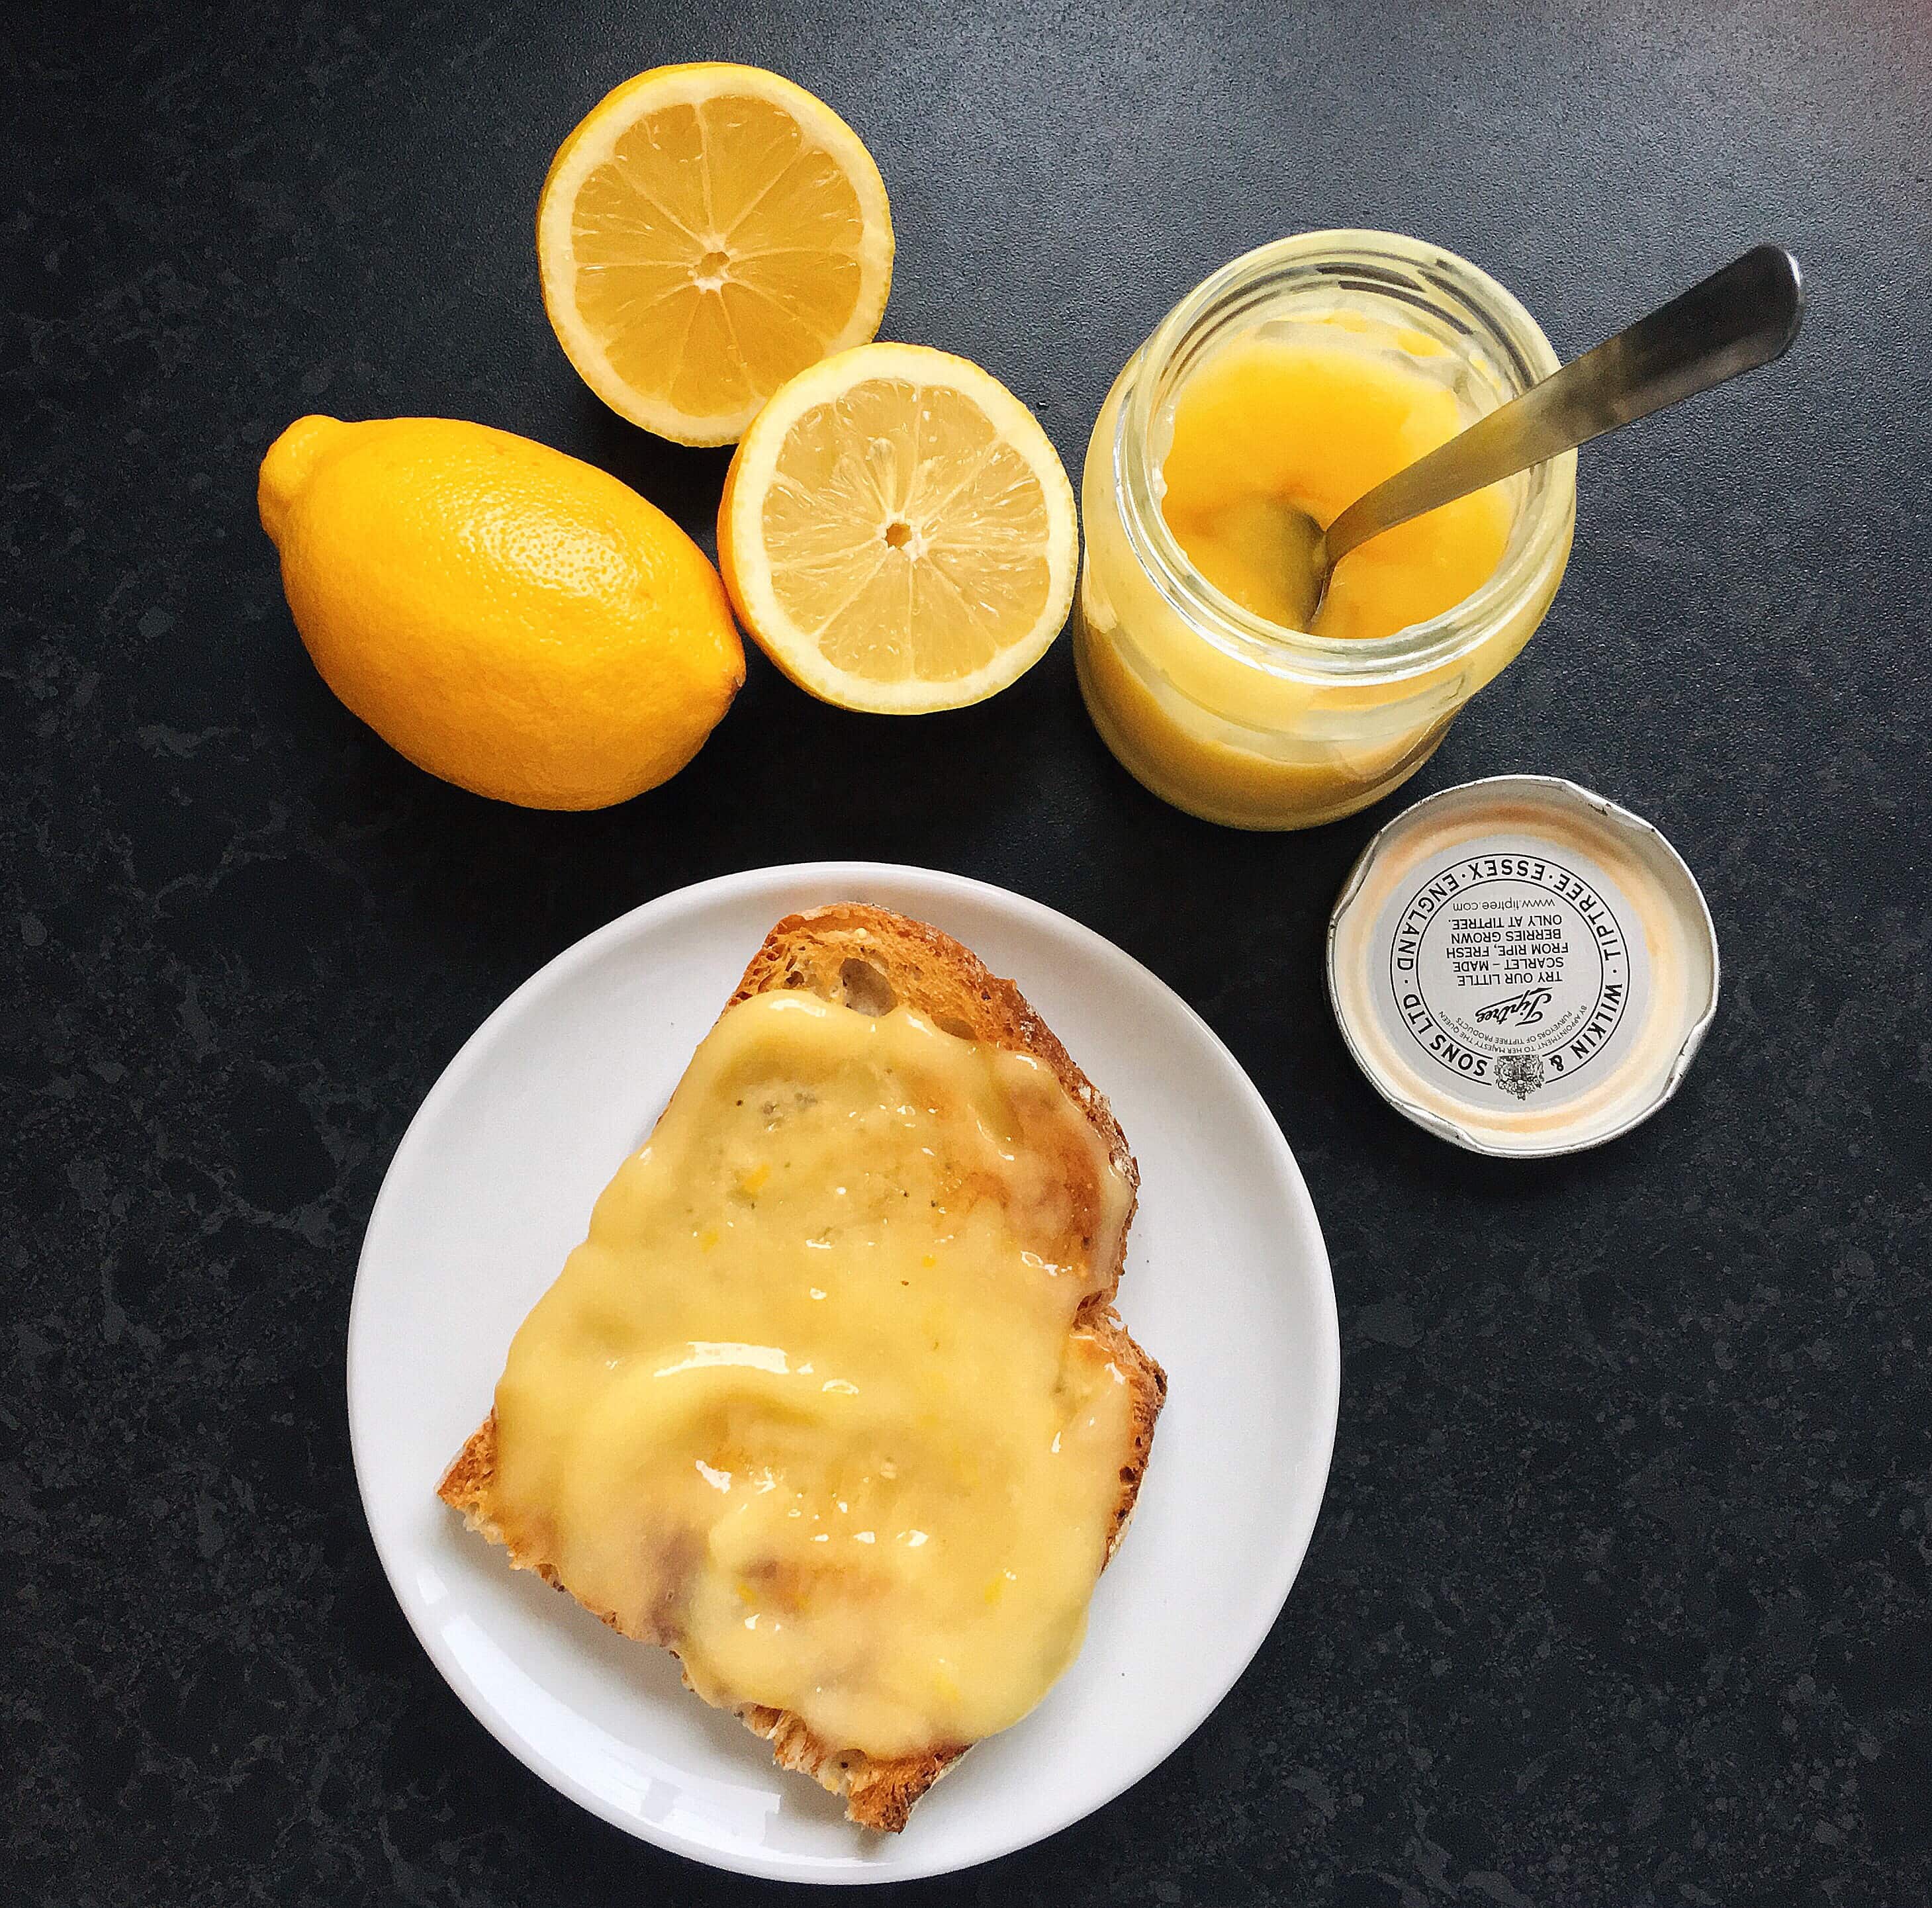 A Pinterest pin with the words "easy 4 minute microwave lemona picture of a piece of toast on a white plate spread with lemon curd, a jar of lemon curd with a spoon and two lemons